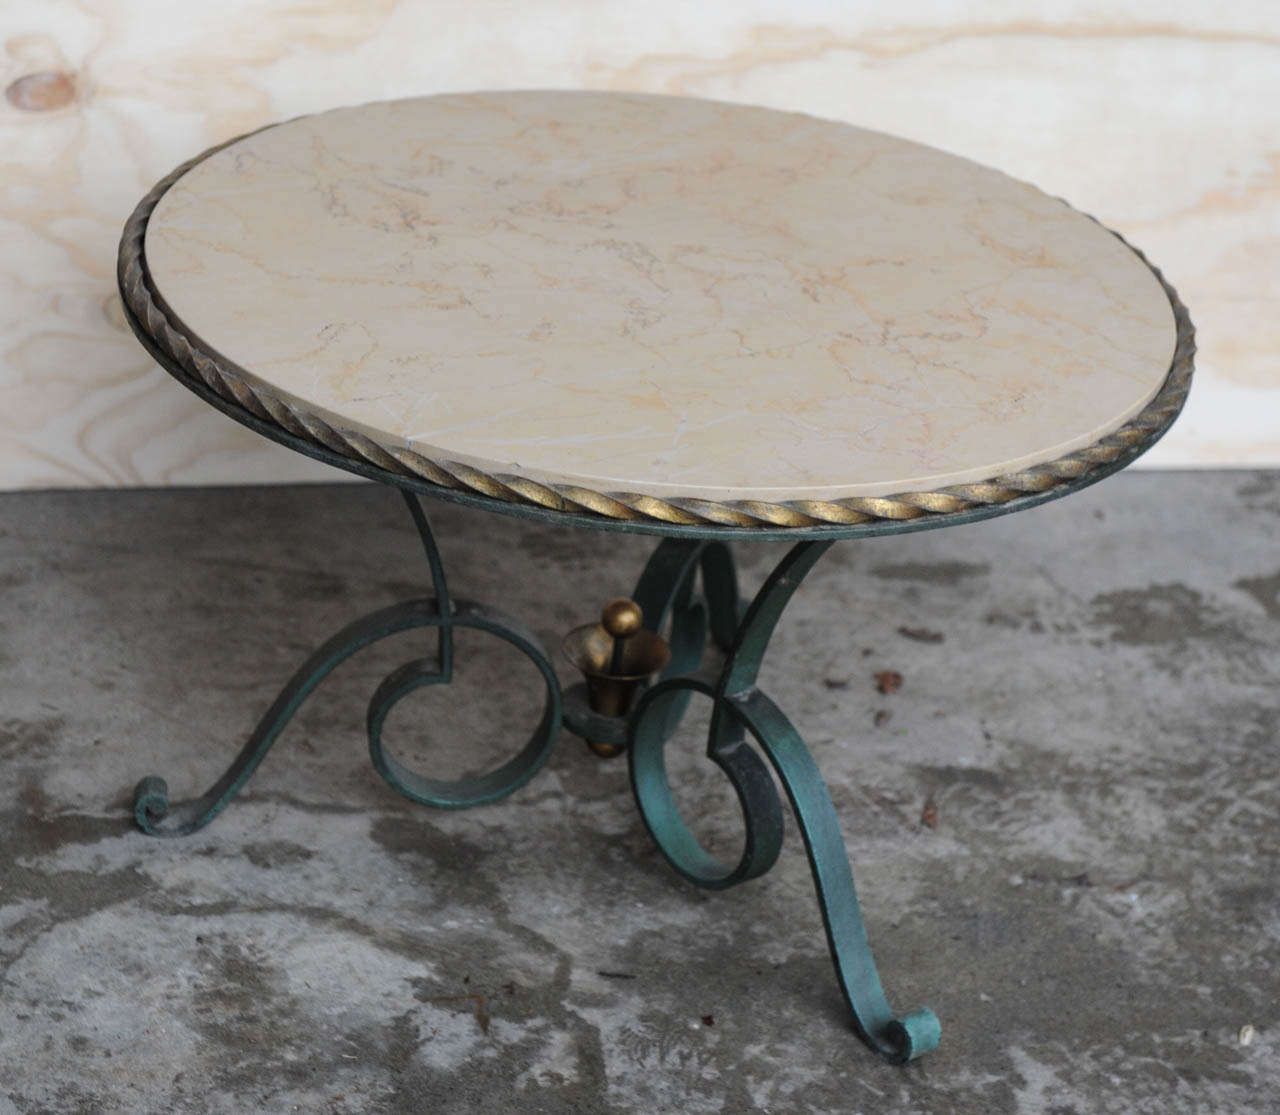 Round Wrought Iron Coffee Tablerobert Merceris At 1stdibs With Regard To Most Popular Round Iron Coffee Tables (View 10 of 20)